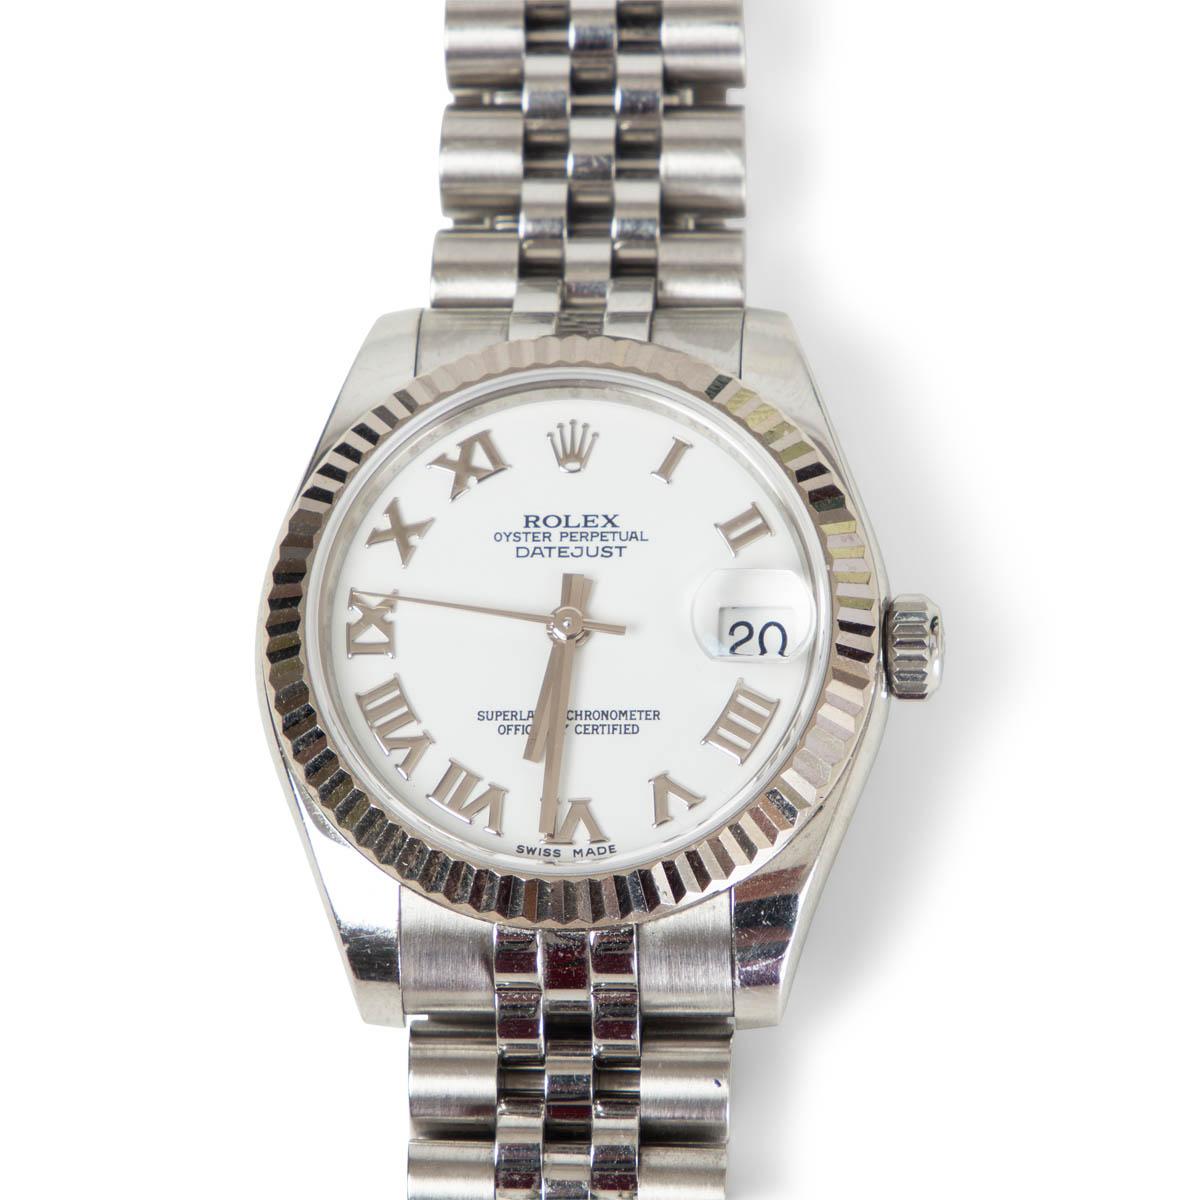 100% authentic Rolex Oyster Perpetual Datejust 31 watch reference number 178274. Jubulee bracelet in steel, fluted bezel in white gold, white dial and case diameter of 31mm. Opens with a fold clasp in steel. Sapphire crystal glass. 10AM water